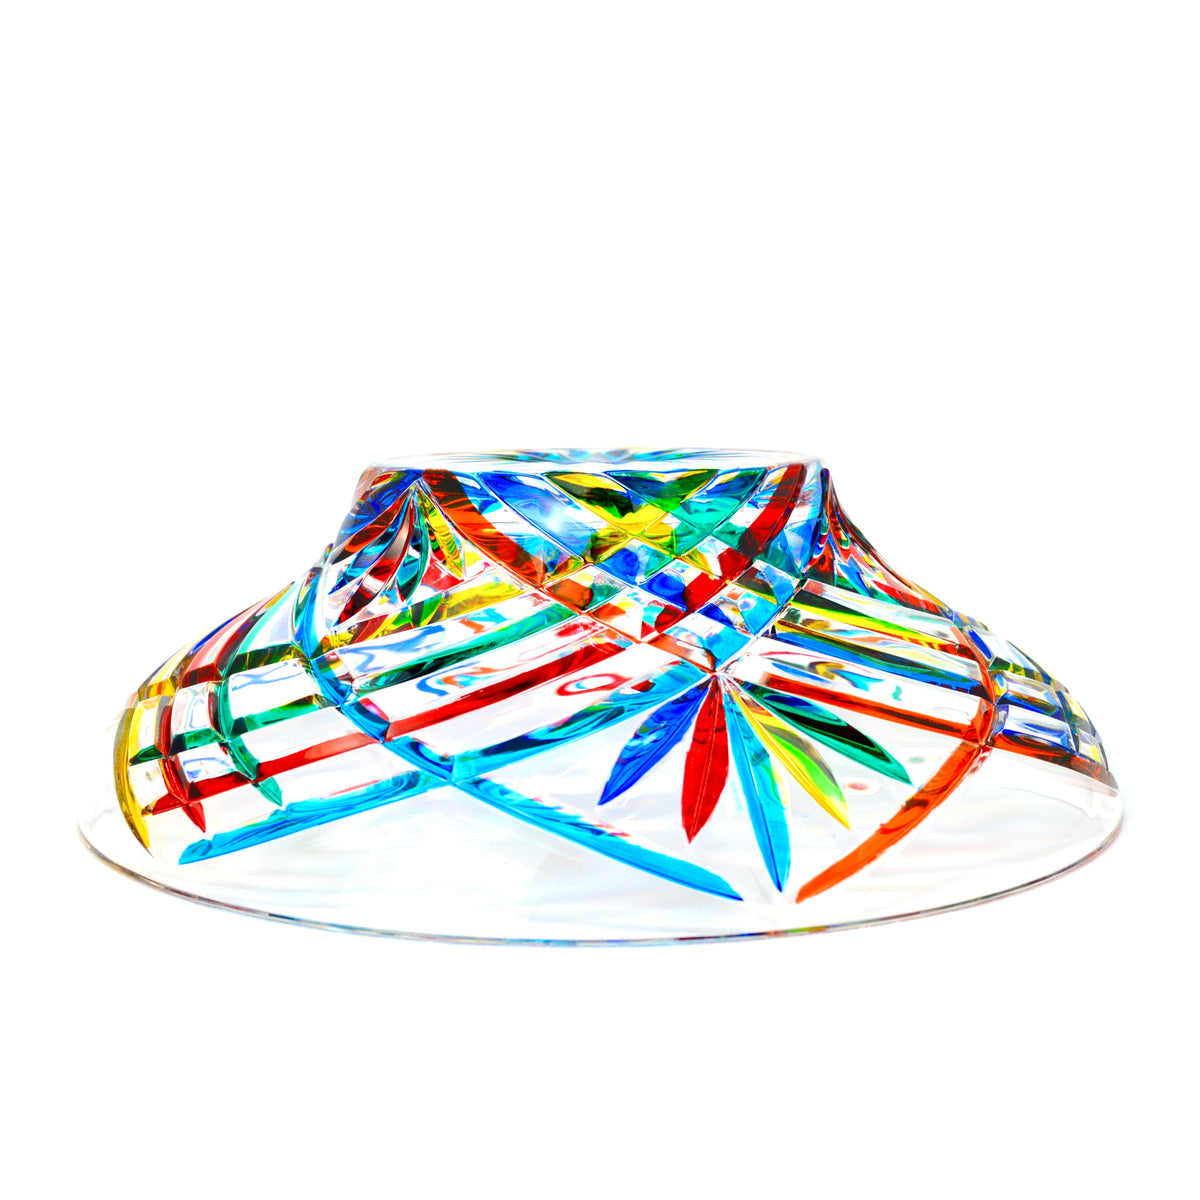 Melodia Centerpiece Bowl, Hand Painted, Made In Italy - My Italian Decor